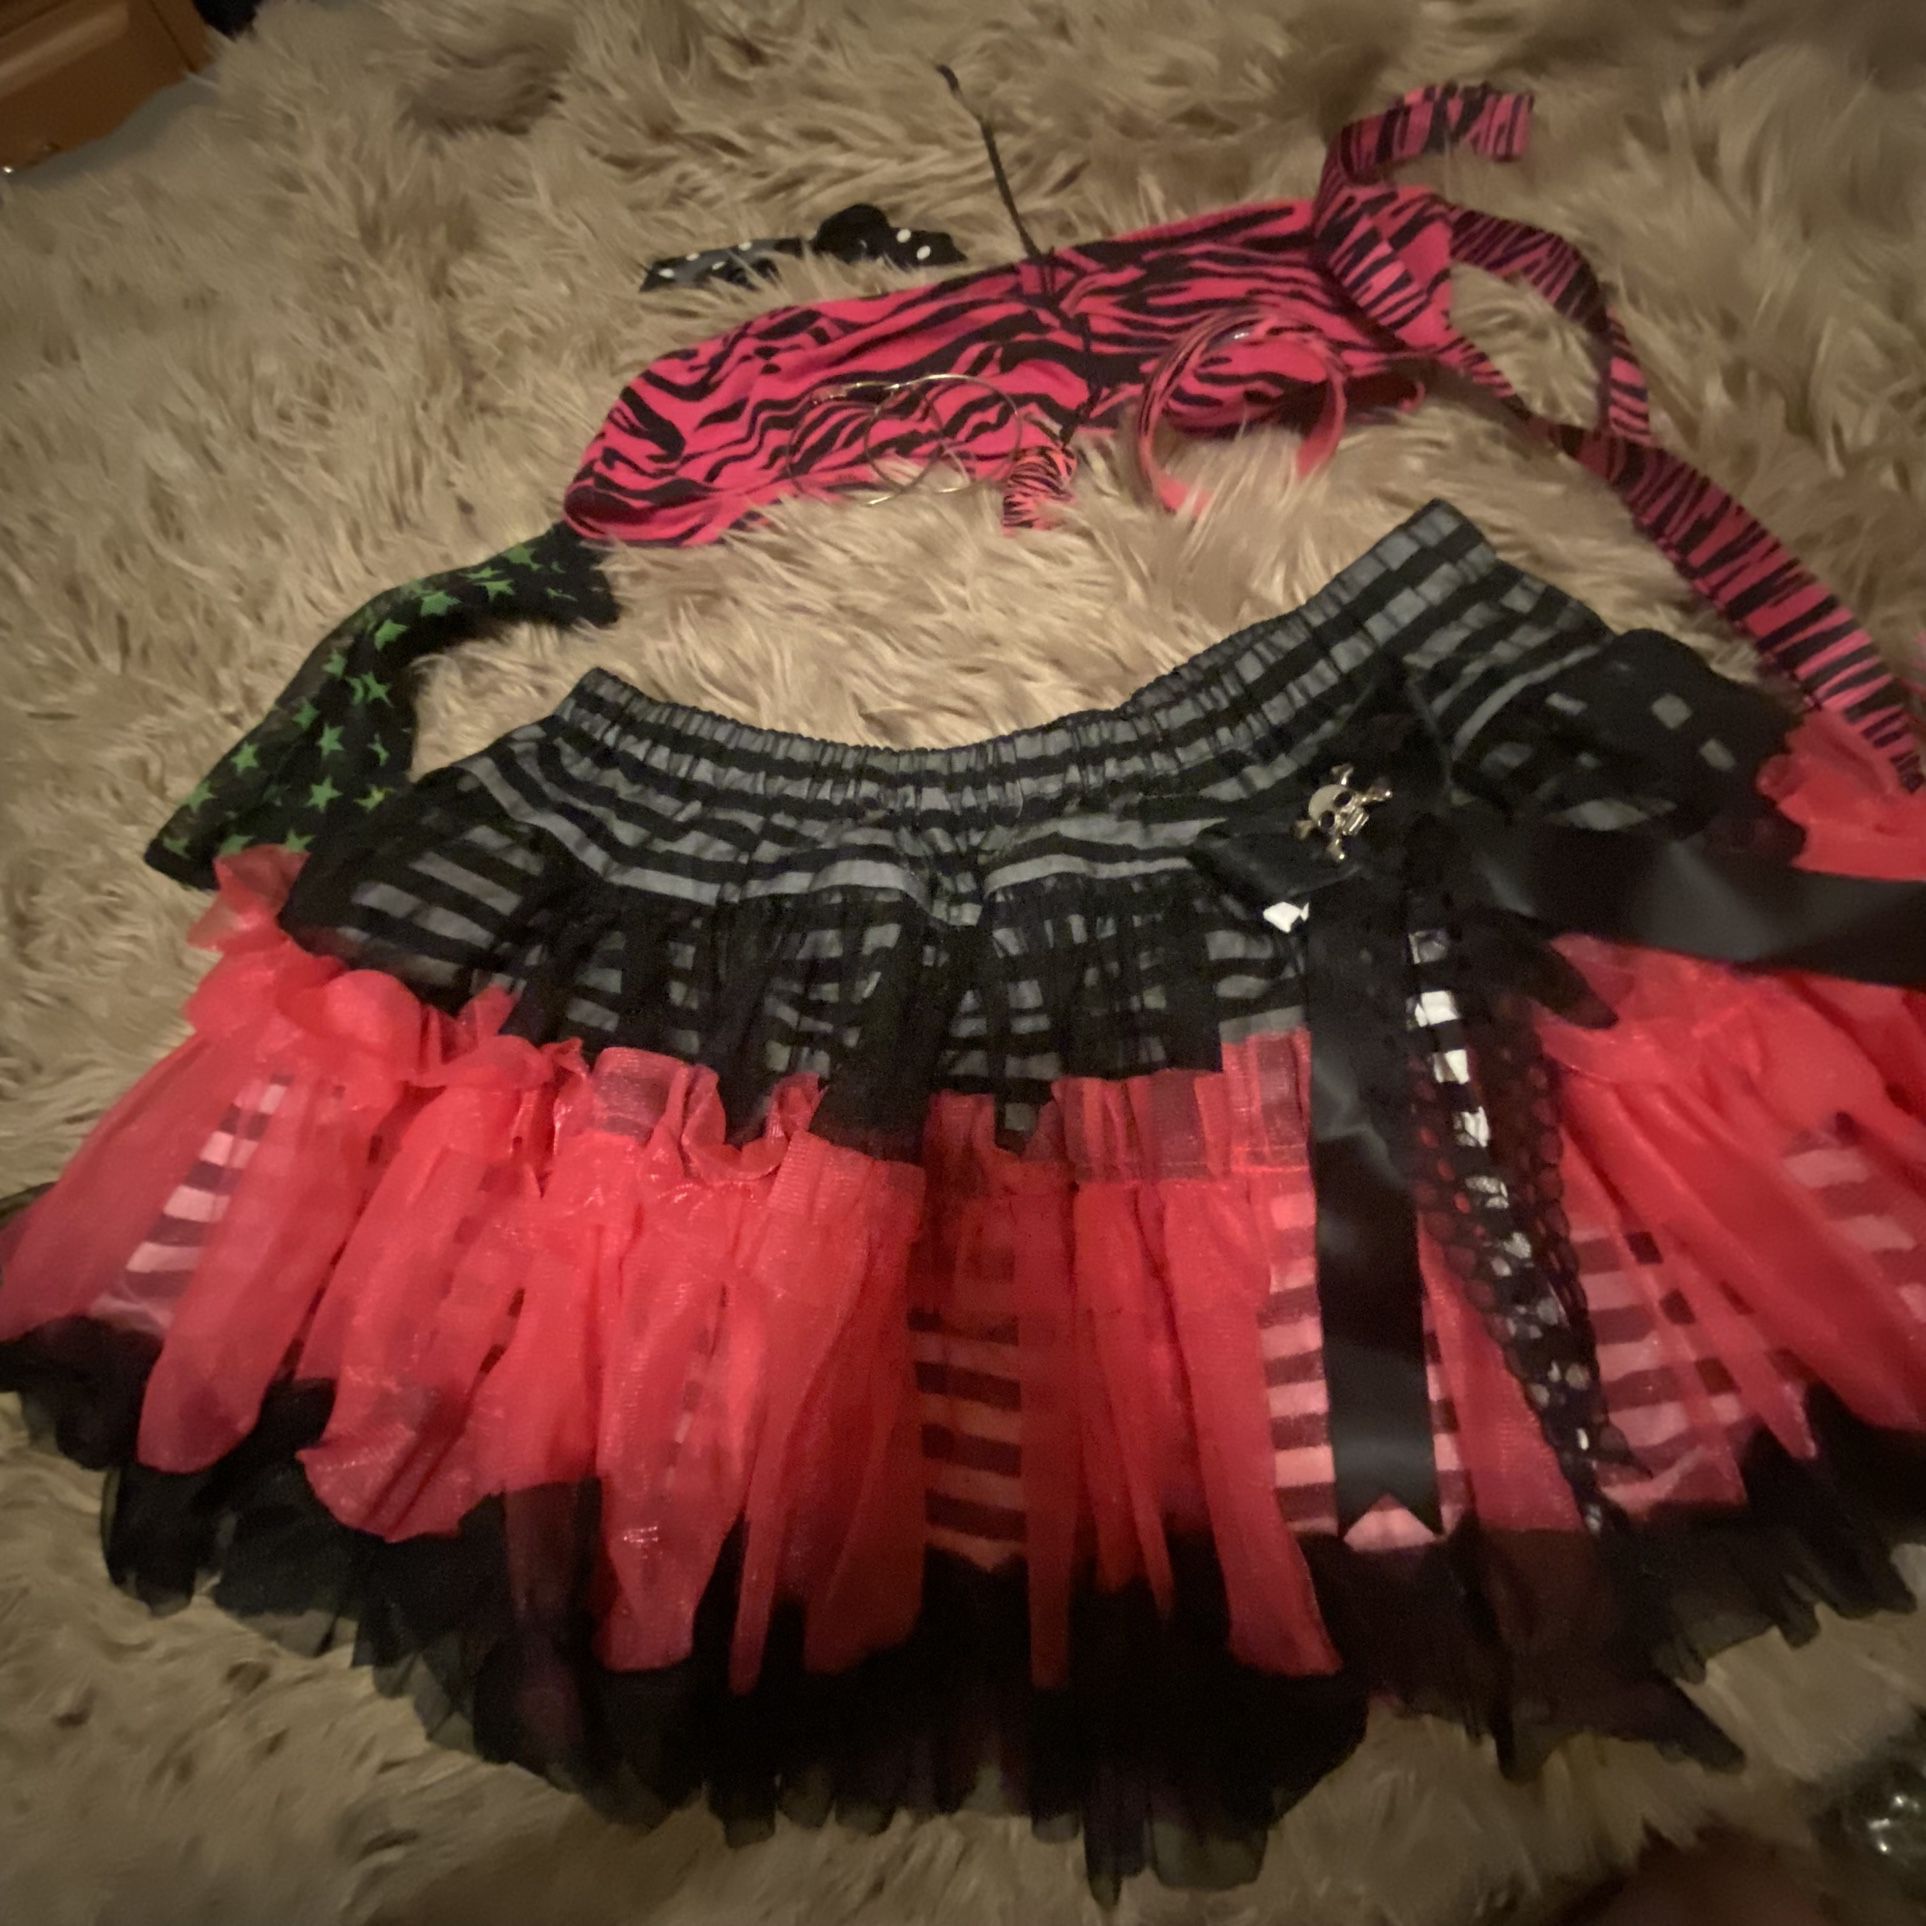 CosPlay Womens Sexy 80s Girl Punk Skirt Slip Tutu Tube Top Size Large Bracelet Heart Necklace Hoop Earrings Headband And Glove